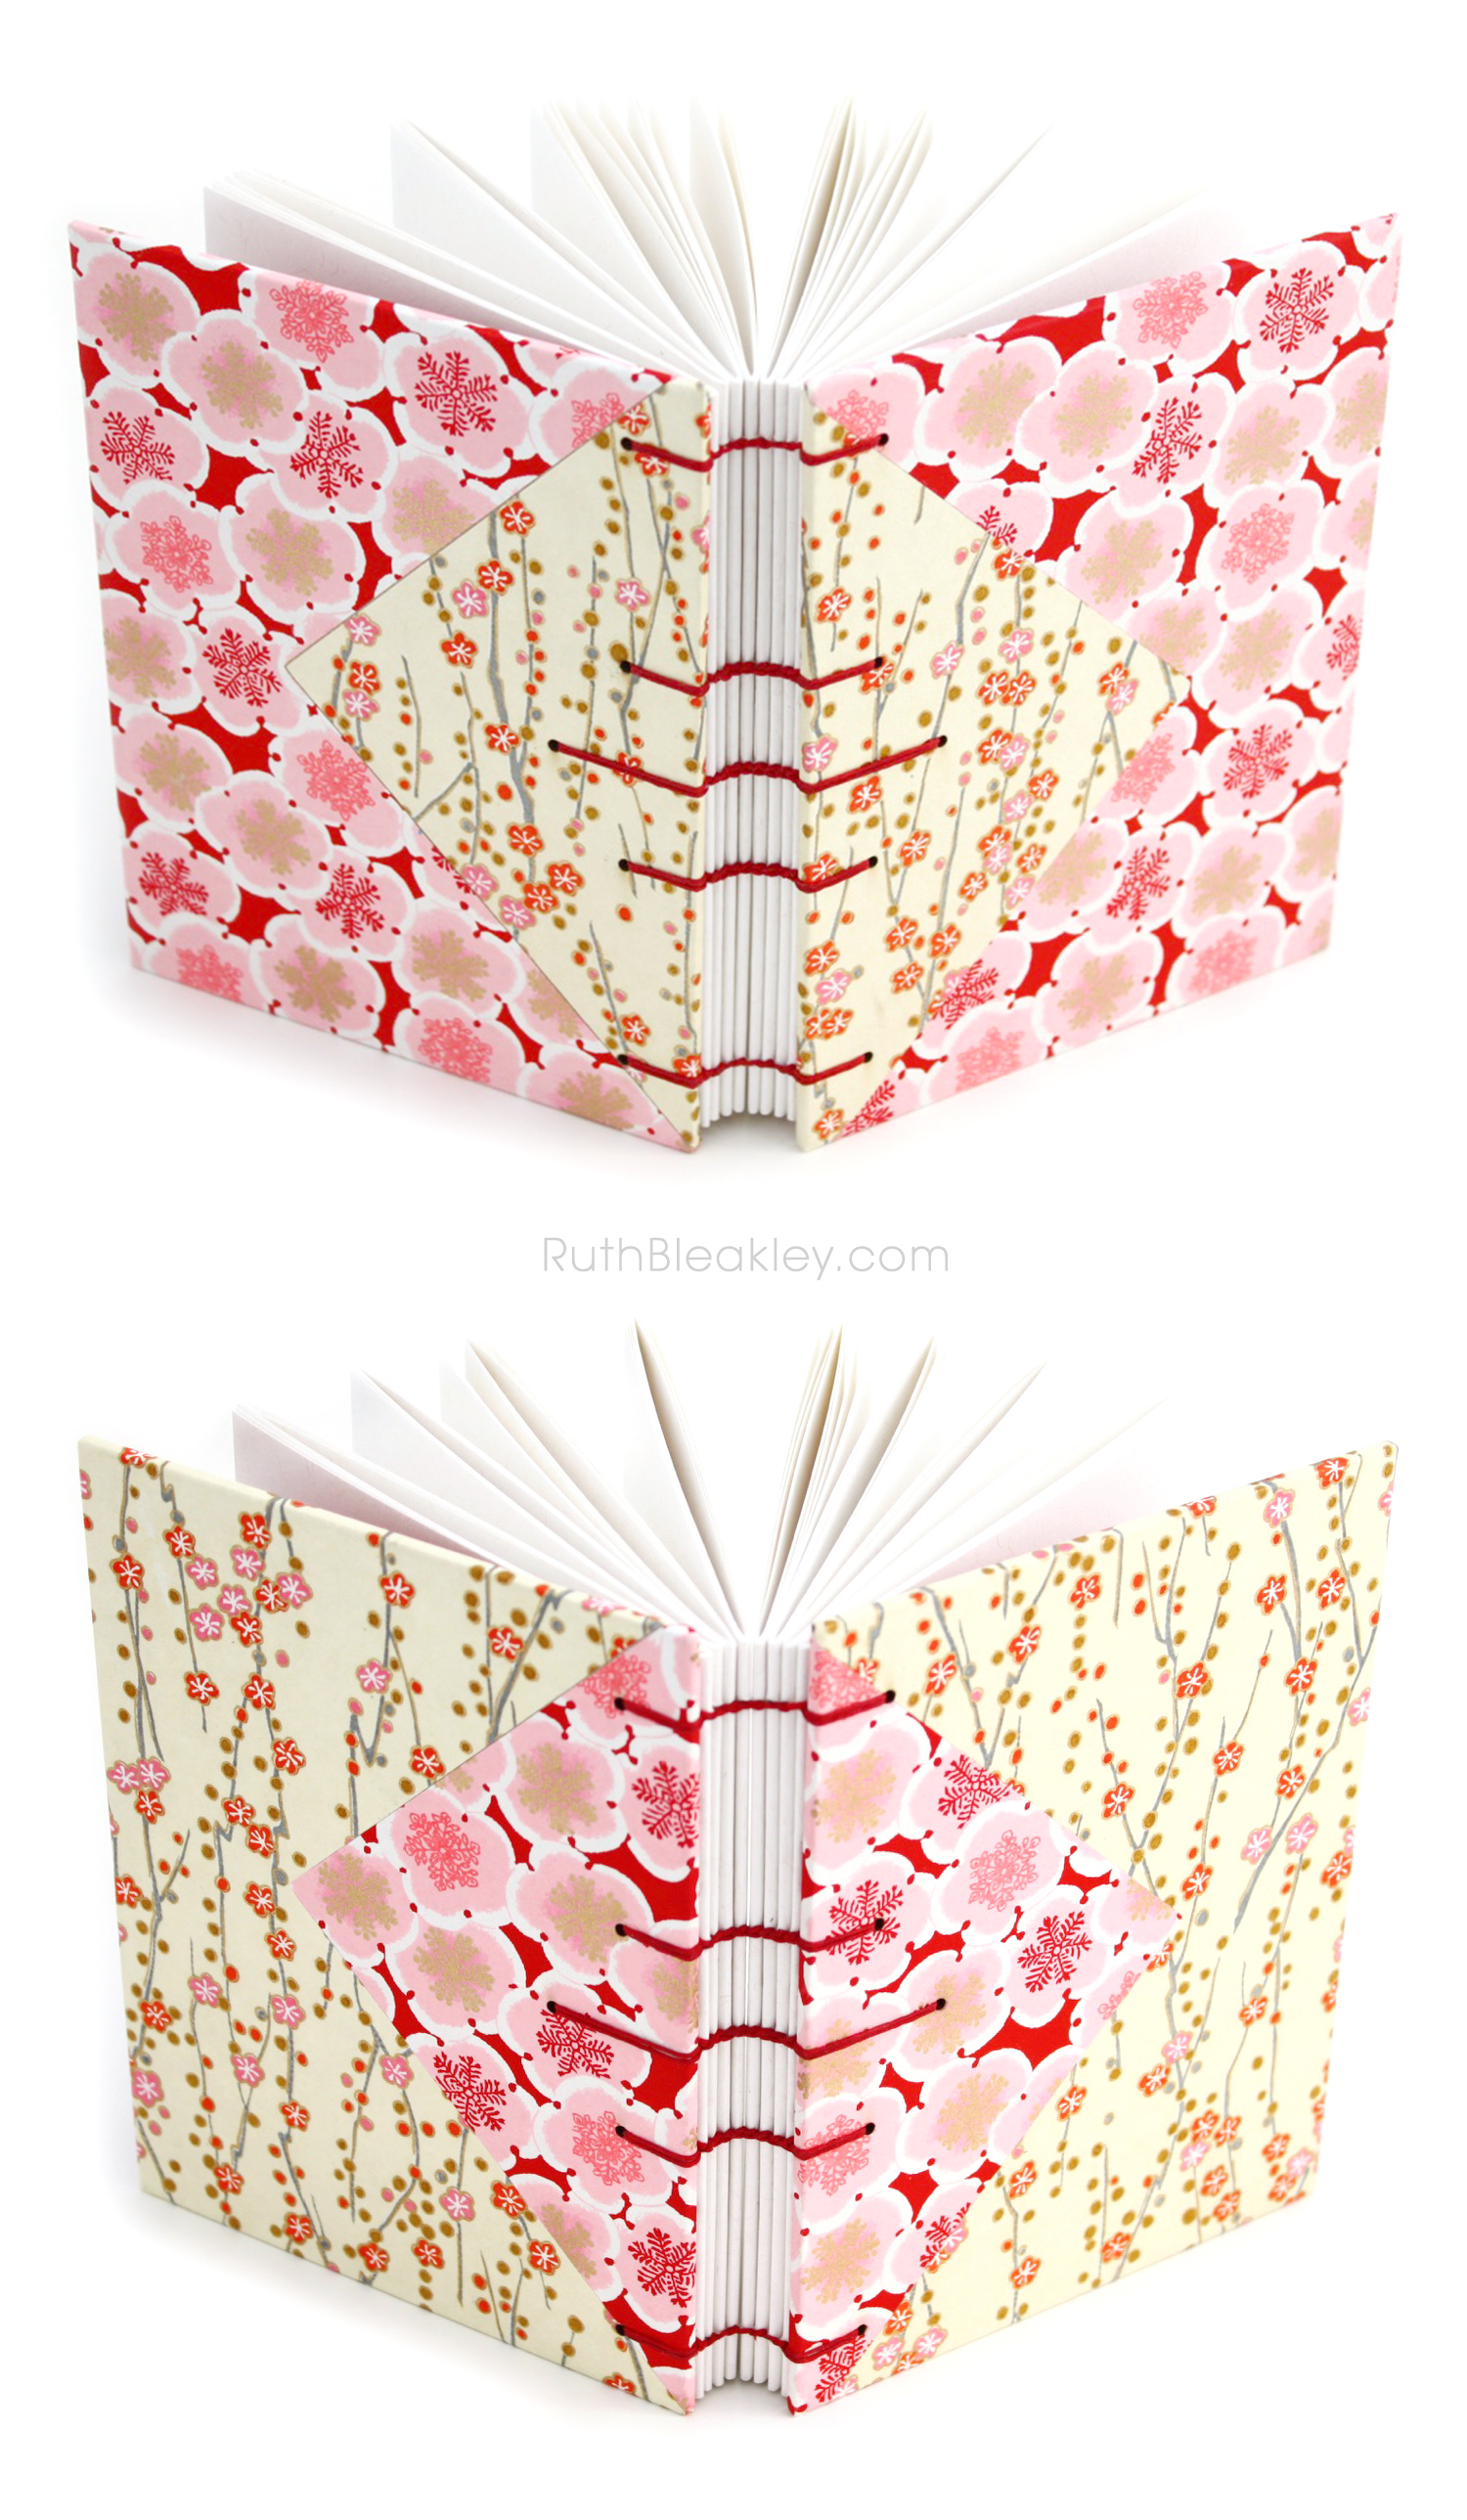 Cherry and Plum Blossom Twin Journal Handmade By Ruth Bleakley with Japanese Chiyogami Paper